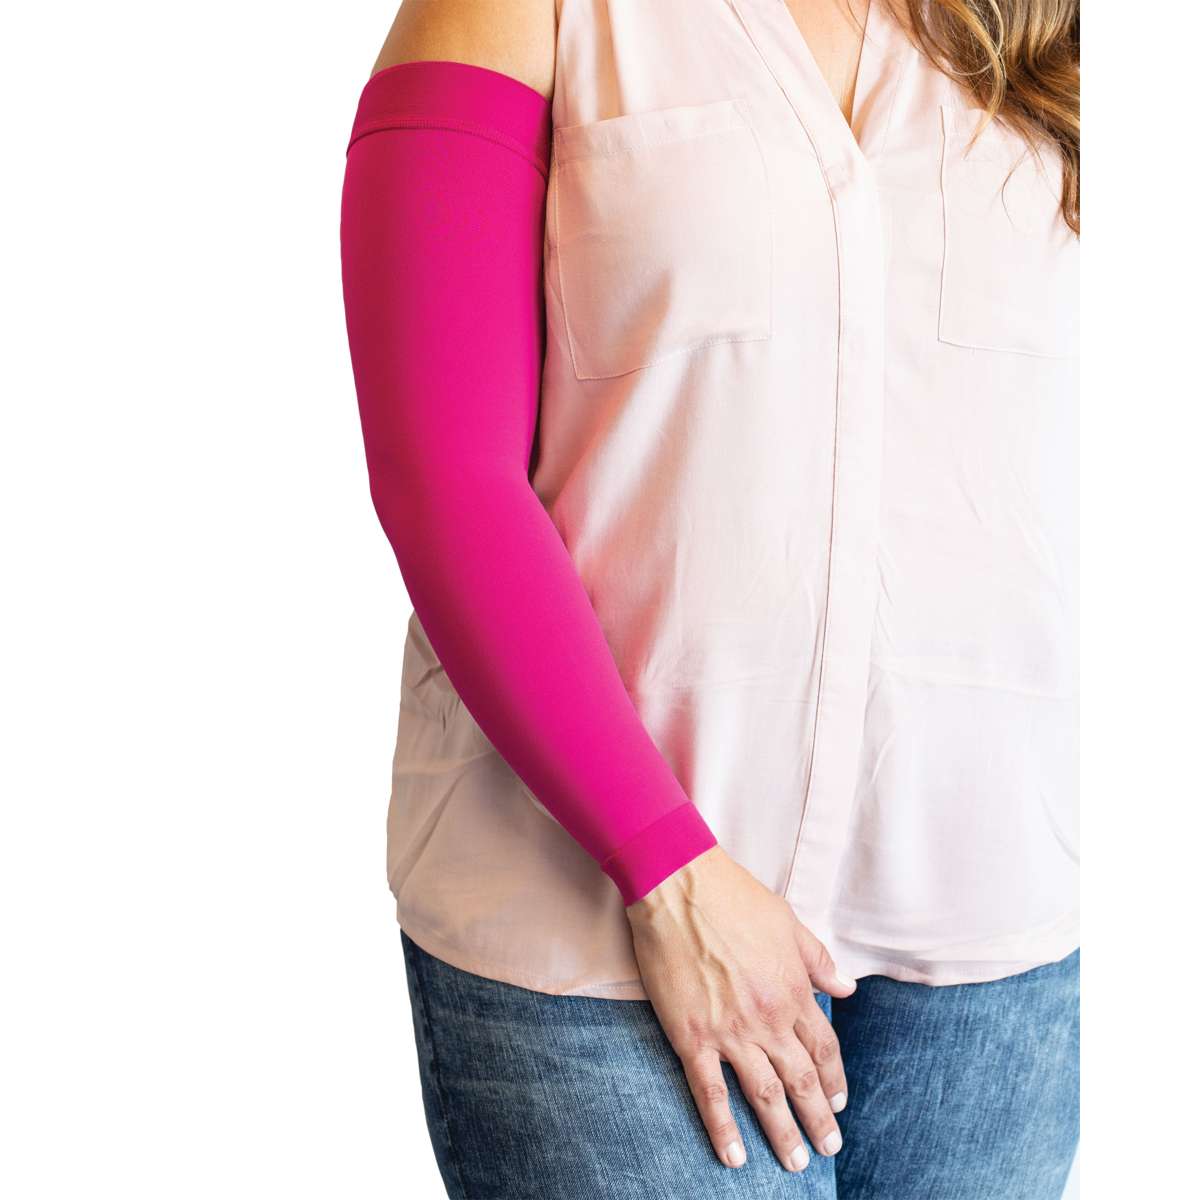 mediven comfort 20-30 arm sleeve long extra-wide